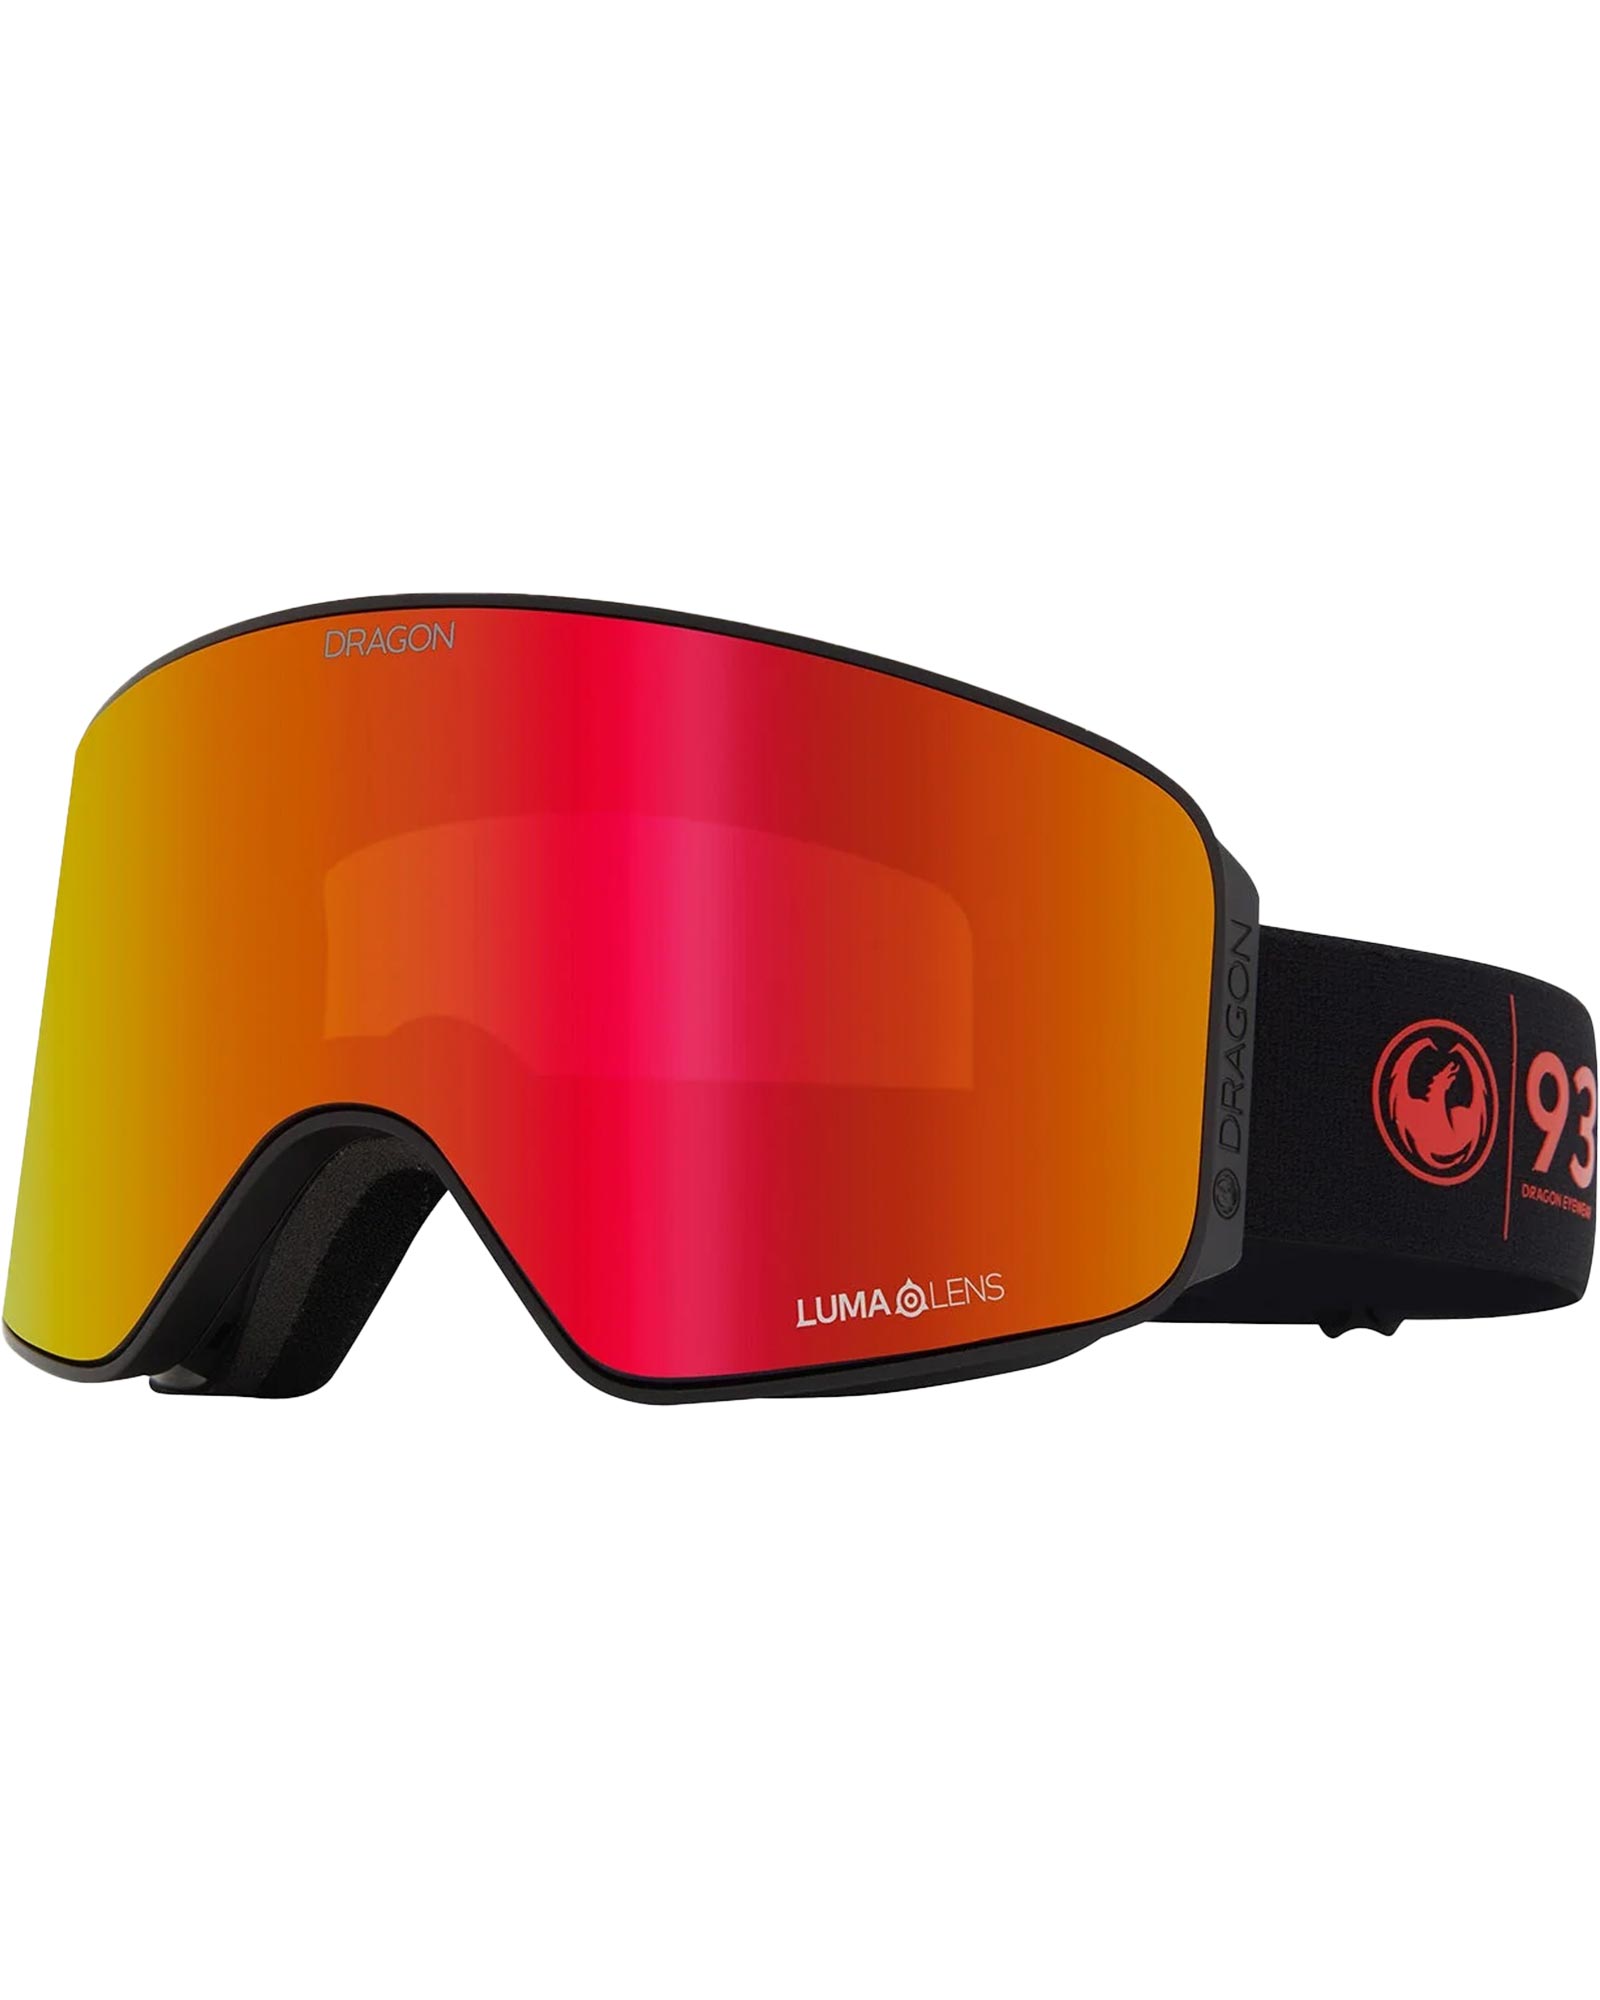 Dragon NFX MAG 30 Years / Lumalens Red Ionized + Lumalens Light Rose Goggles  0